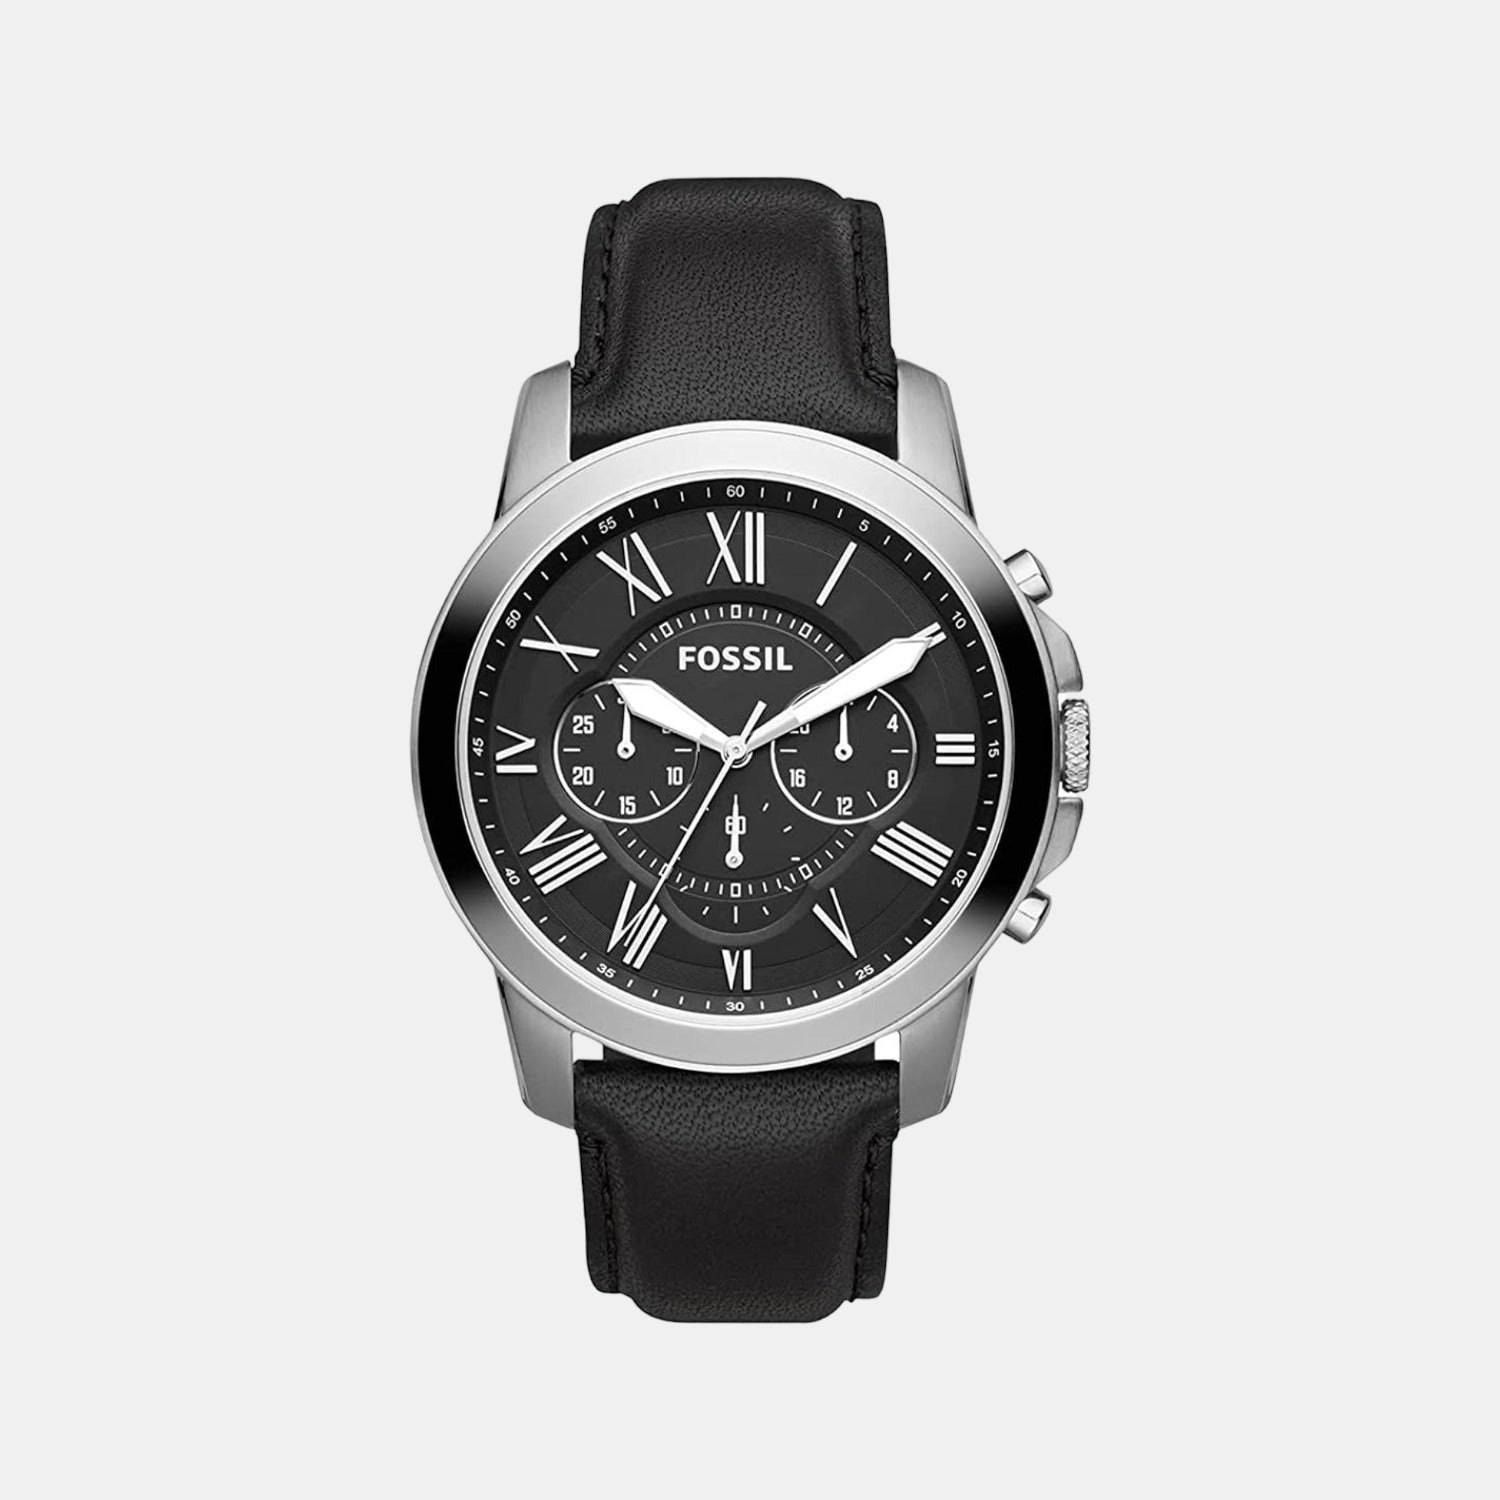 Male Black Leather Chronograph Watch FS4812